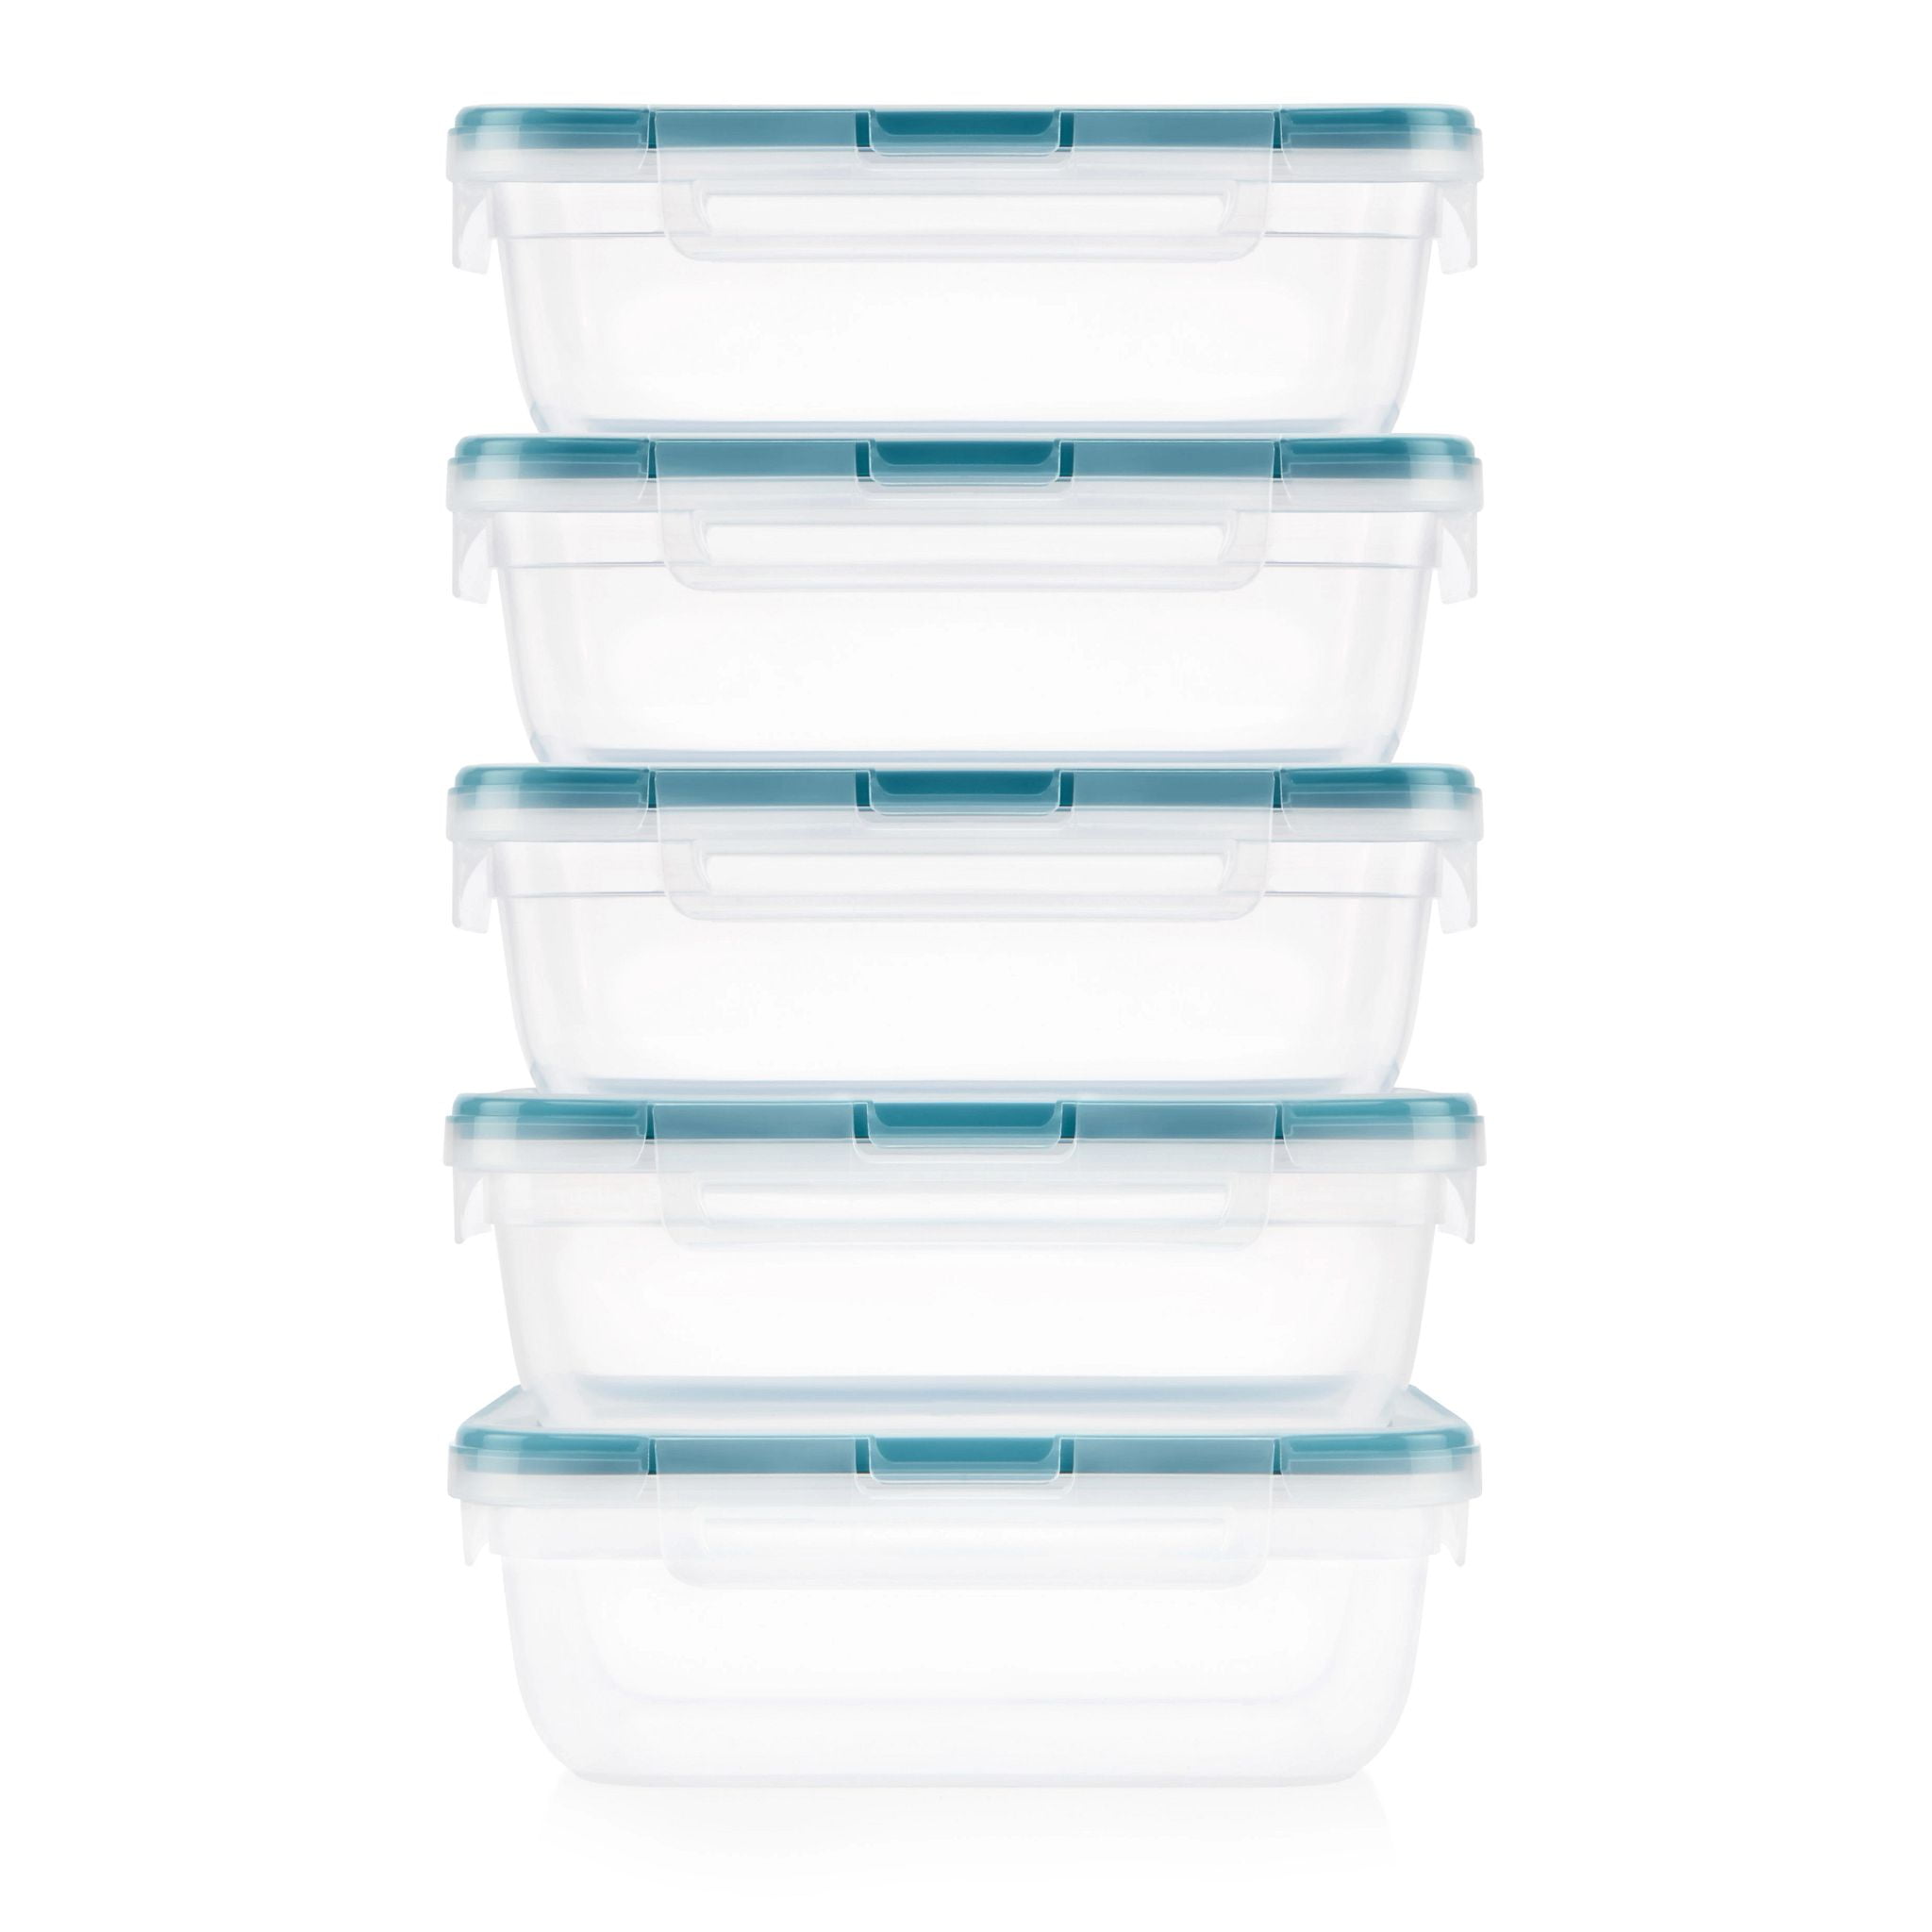  Snapware Total Solution 10-Pc Plastic Food Storage Containers  Set, 3.8-Cup Round Meal Prep Container, Non-Toxic, BPA-Free Lids with 4  Locking Tabs, Microwave, Dishwasher, and Freezer Safe : Home & Kitchen